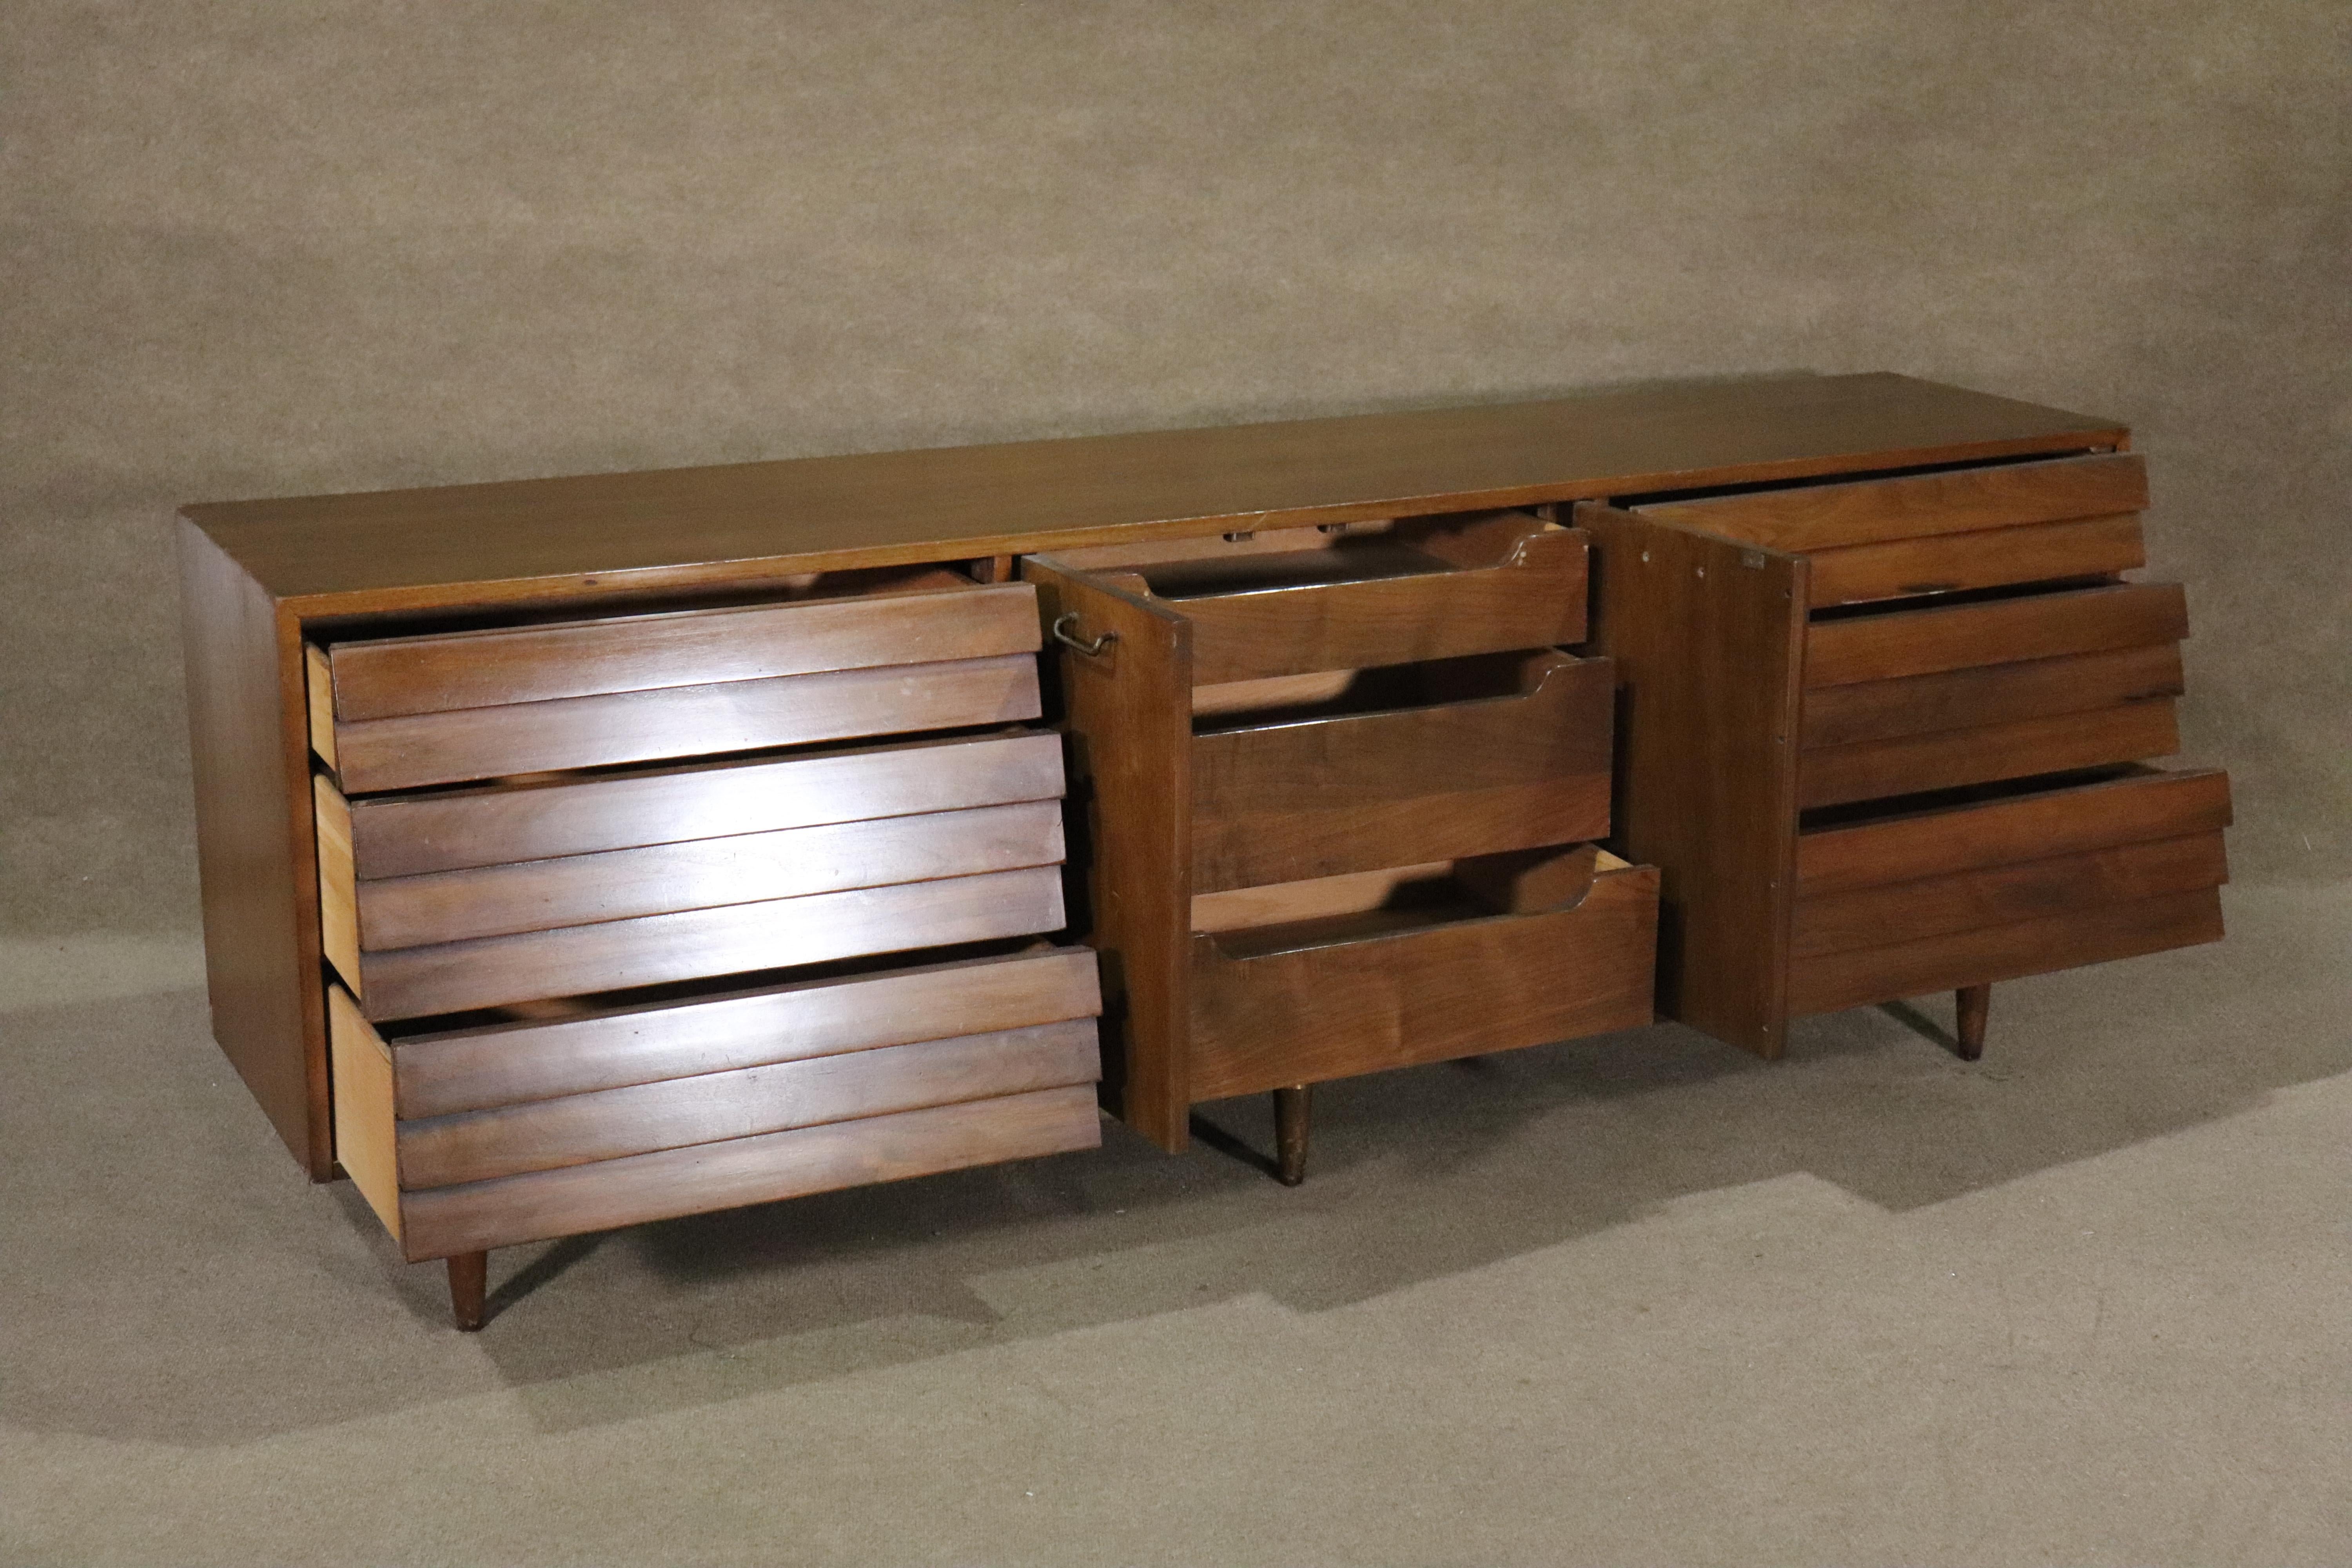 Stunning mid-century design by Merton Gershun for Martinsville. Long walnut dresser with louvered front drawers, brass trim, and hidden drawers in the middle.
Please confirm location NY or NJ